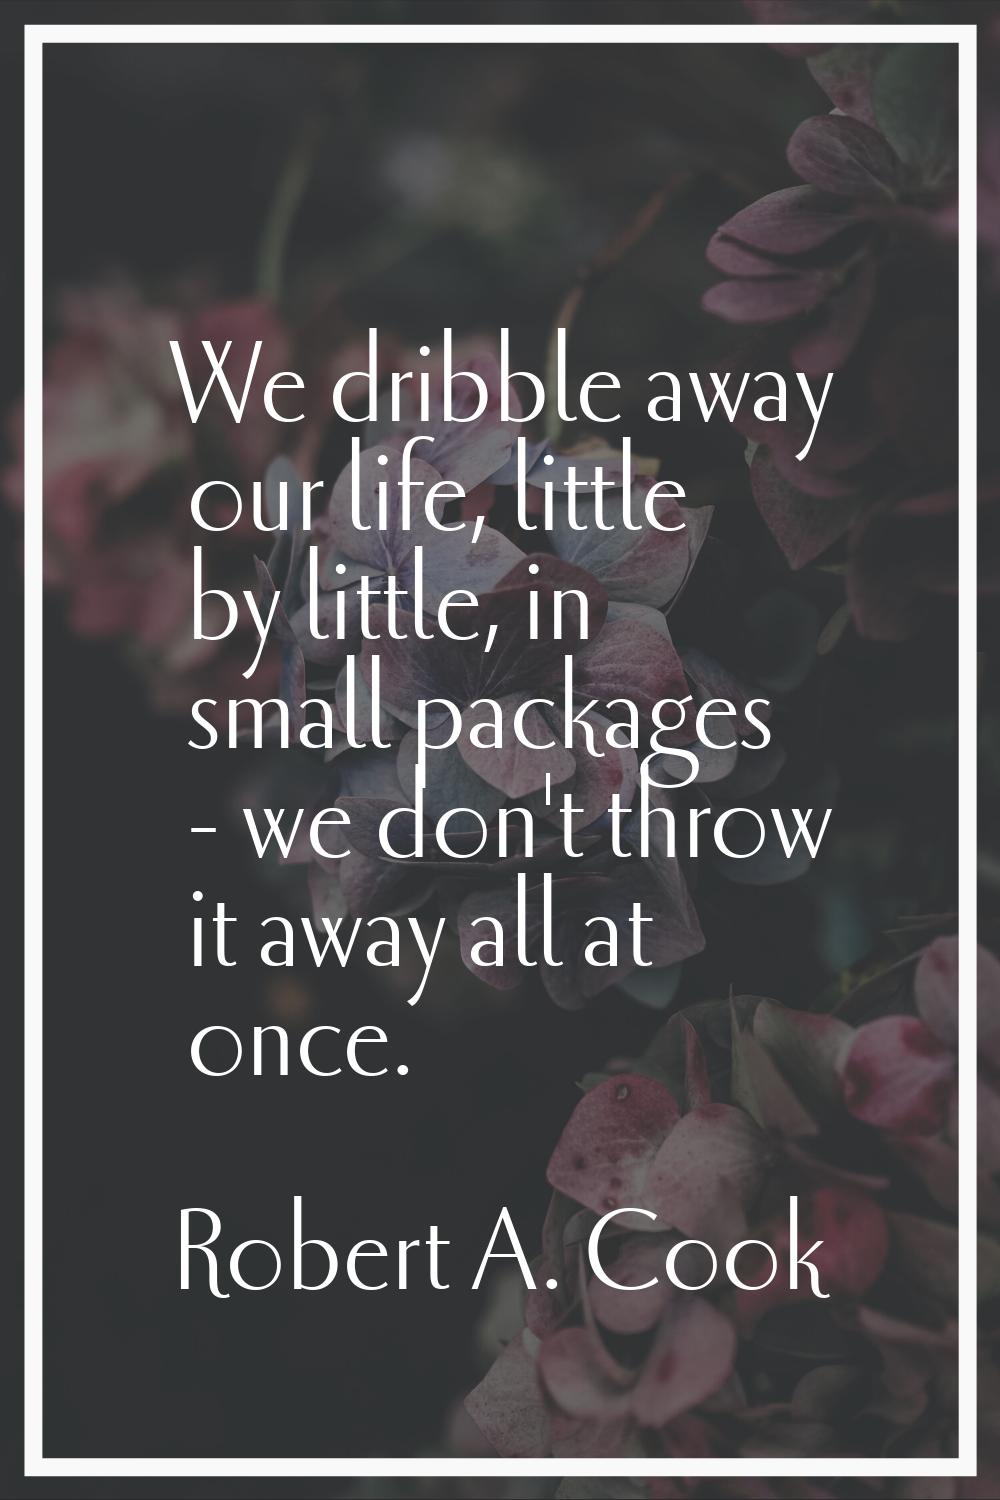 We dribble away our life, little by little, in small packages - we don't throw it away all at once.